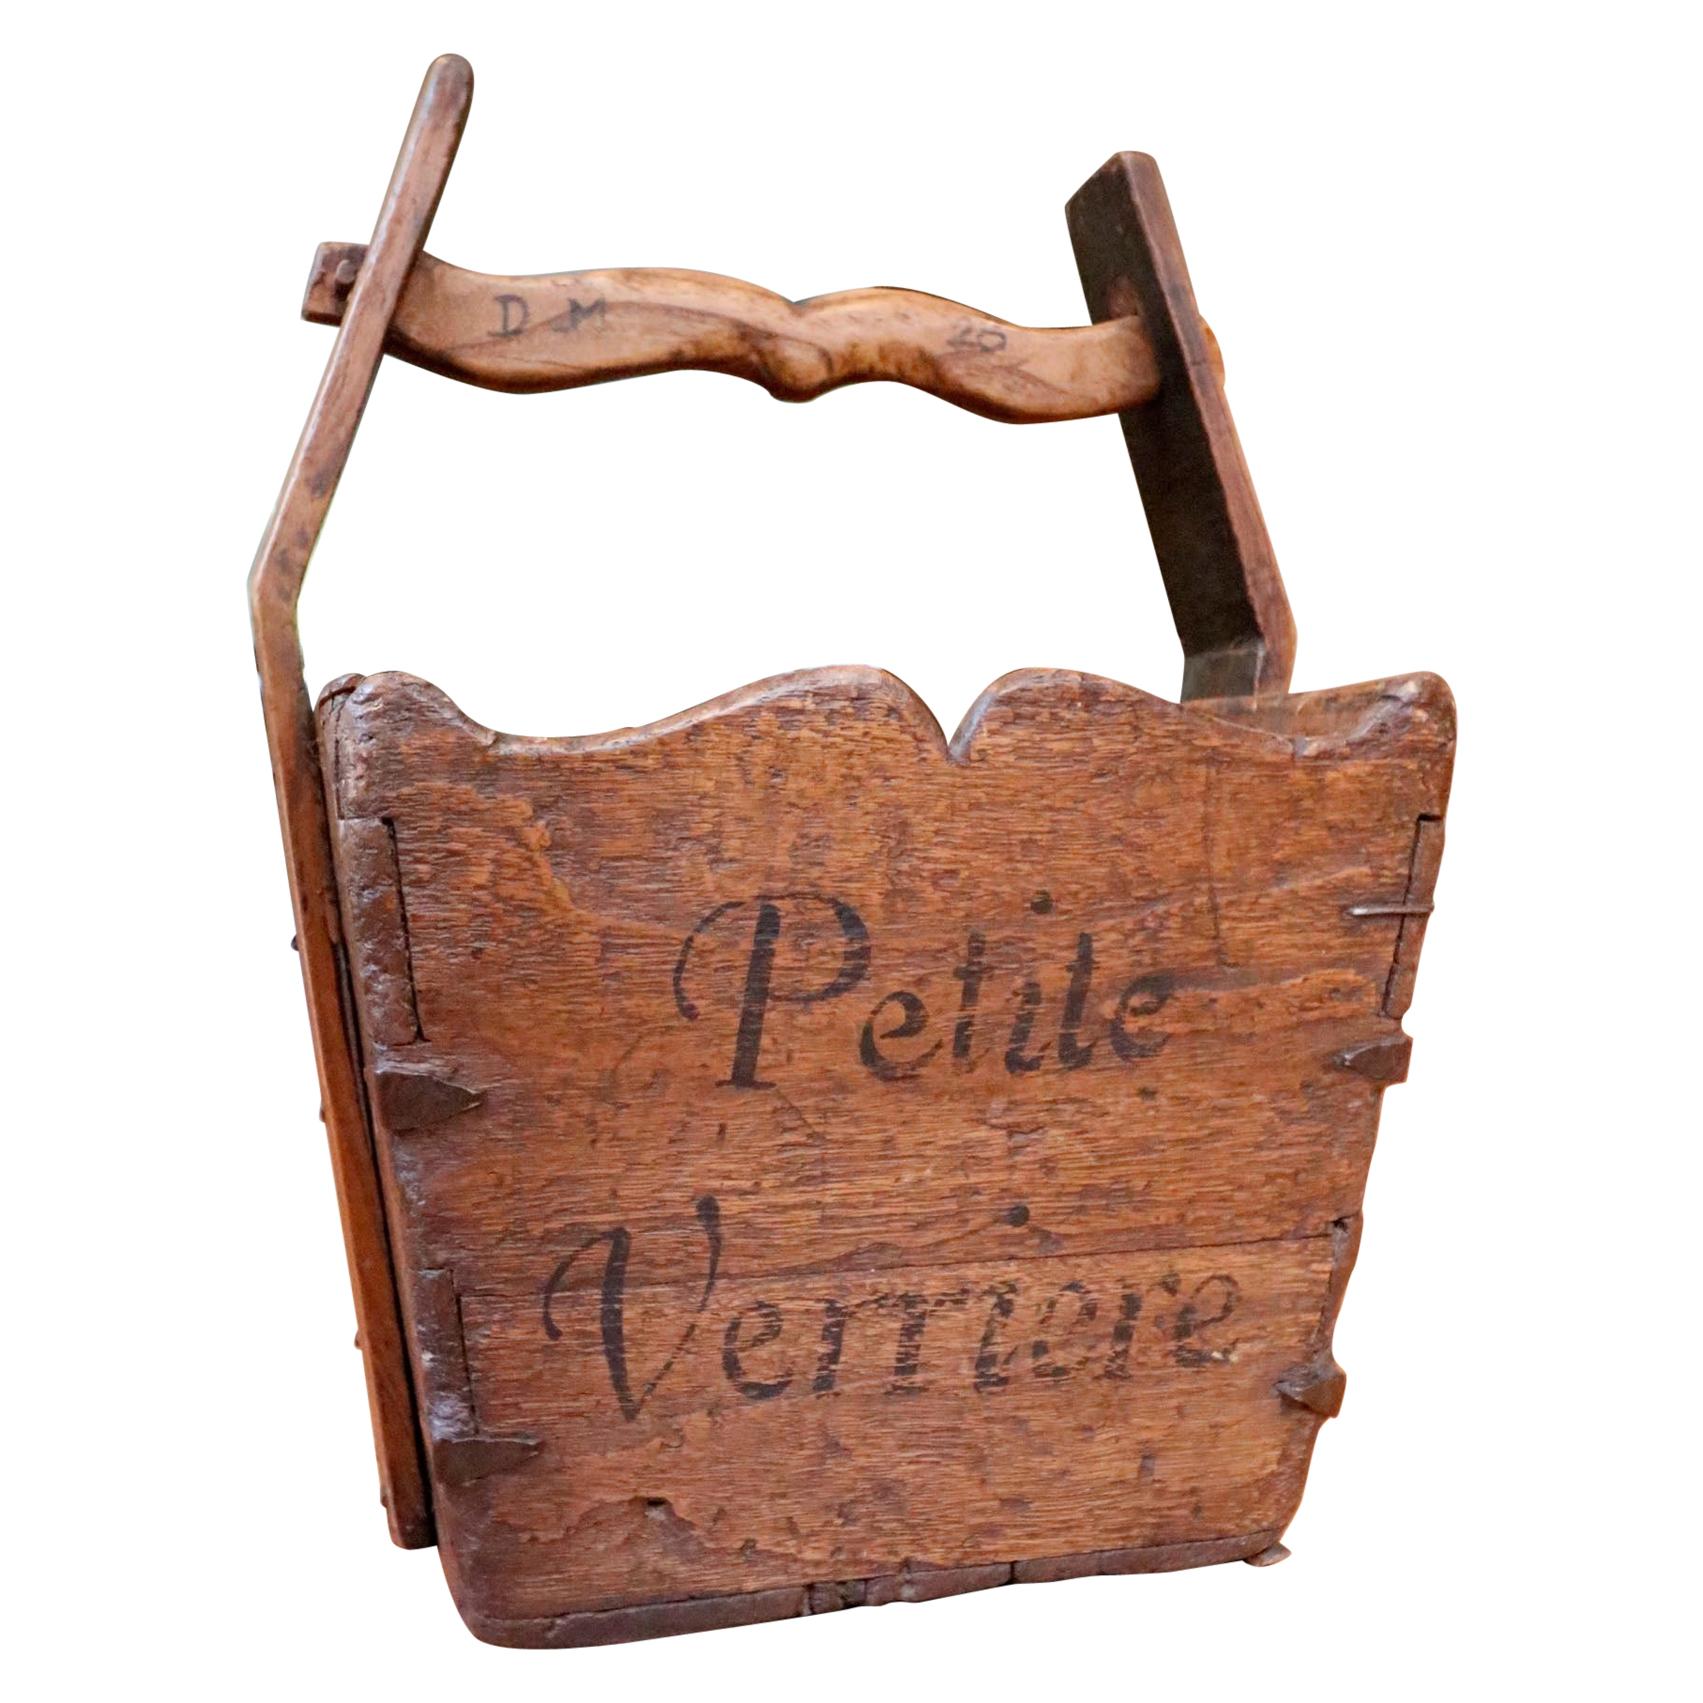 Provence Alpes Cote d'Azur Hand Made Petite Verrier Reclaimed Wood Carriers Box